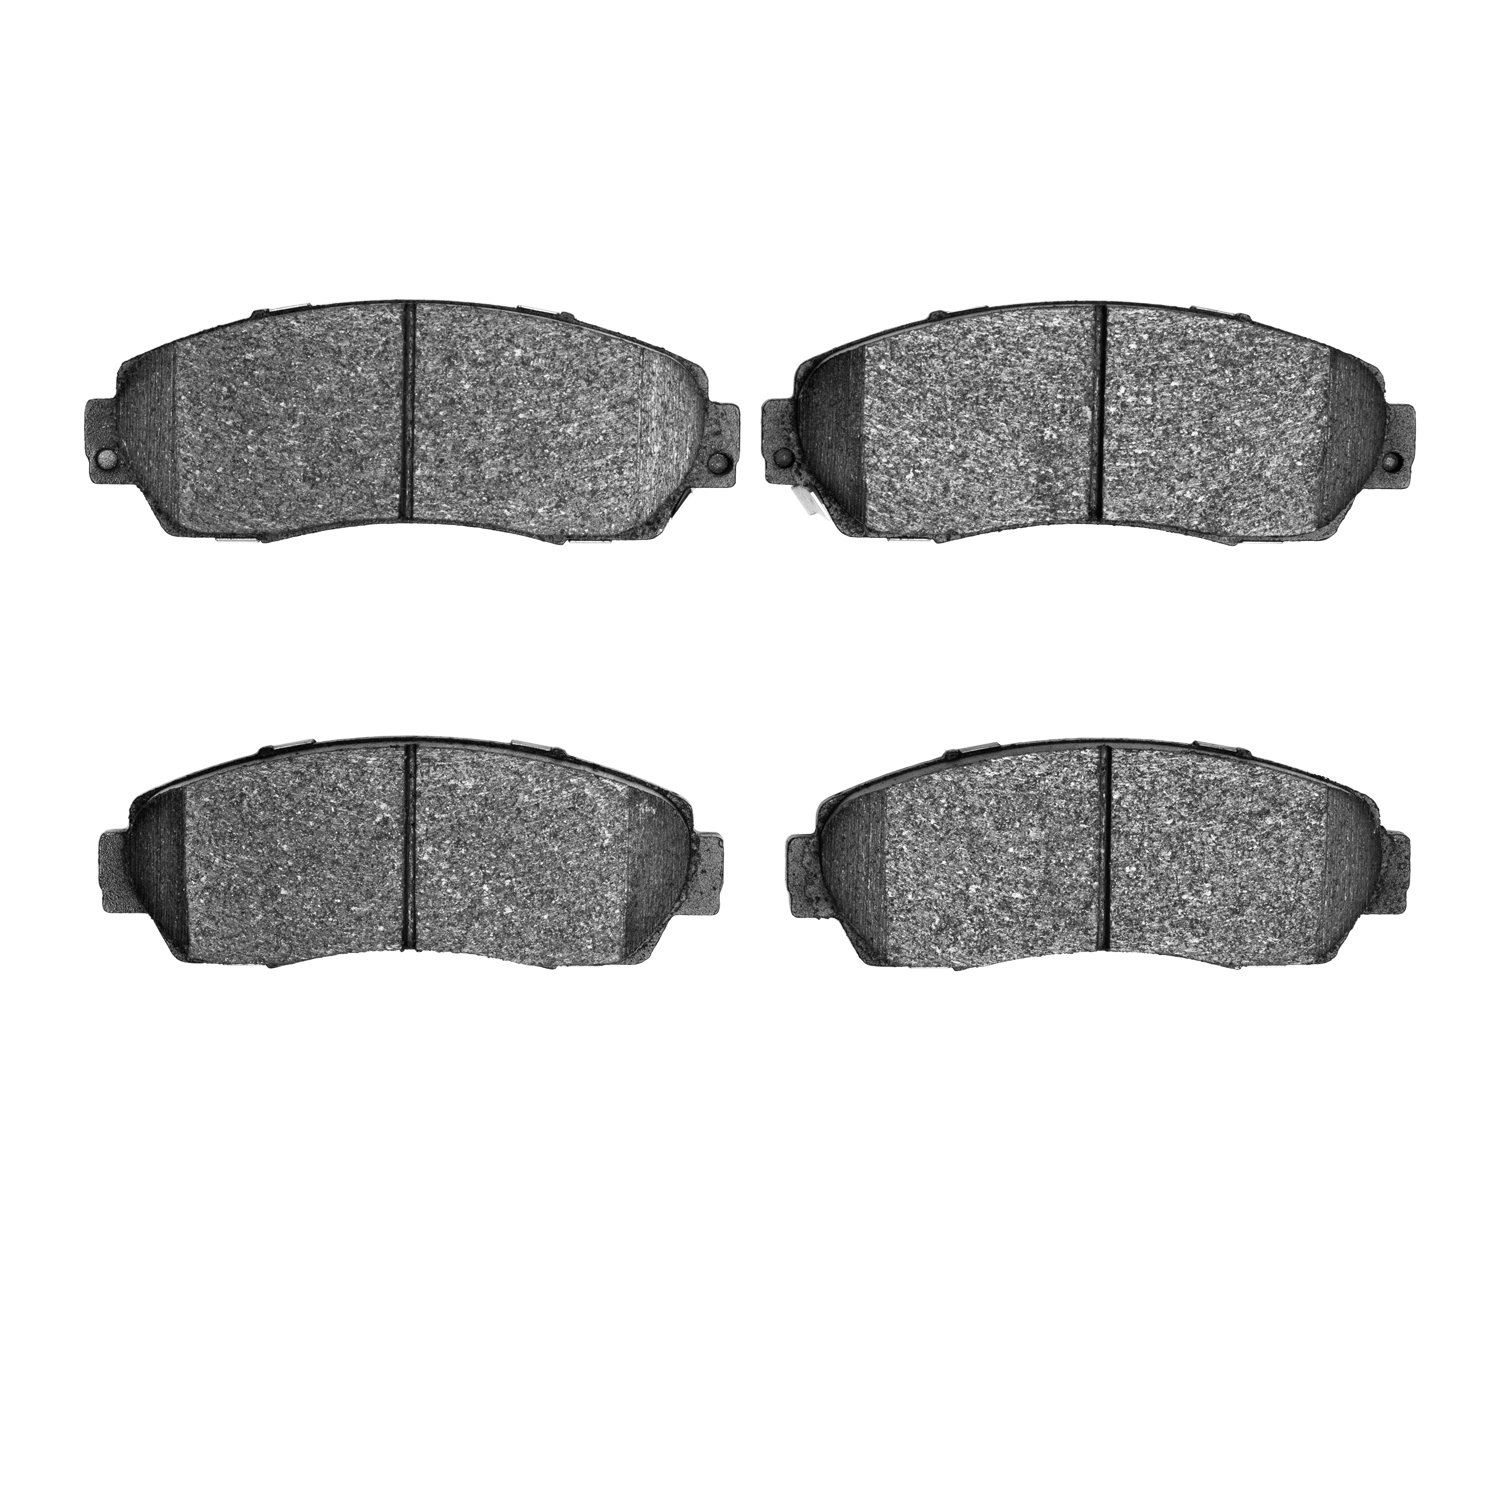 1552-1521-00 5000 Advanced Ceramic Brake Pads, Fits Select Acura/Honda, Position: Front